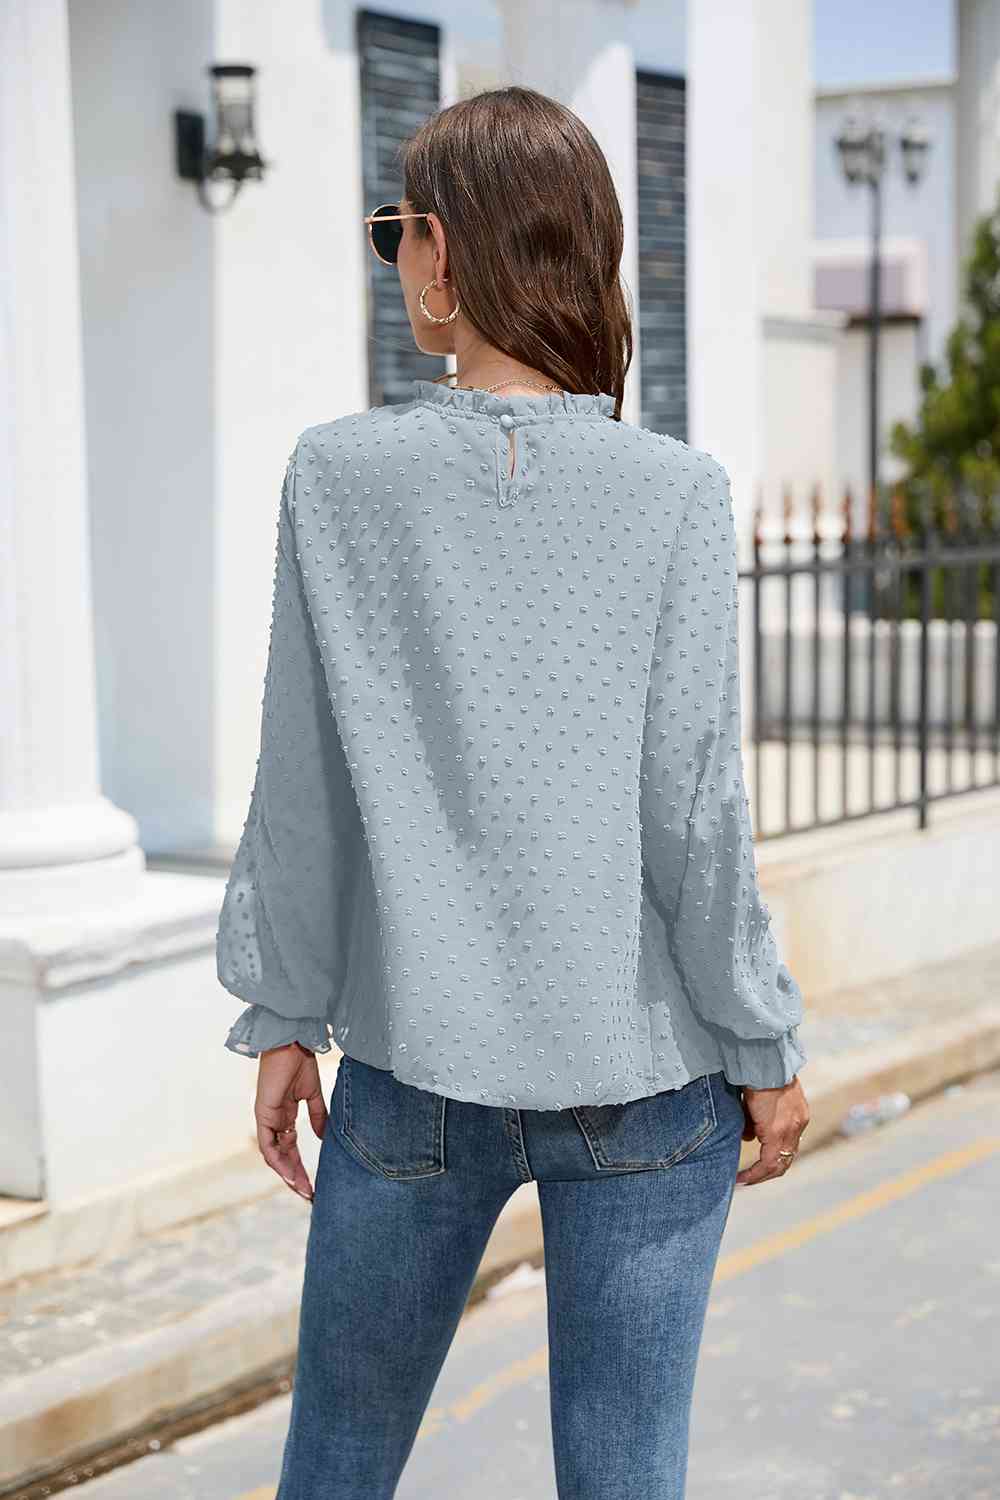 Smocked Mock Neck Swiss Dot Top - Women’s Clothing & Accessories - Shirts & Tops - 17 - 2024